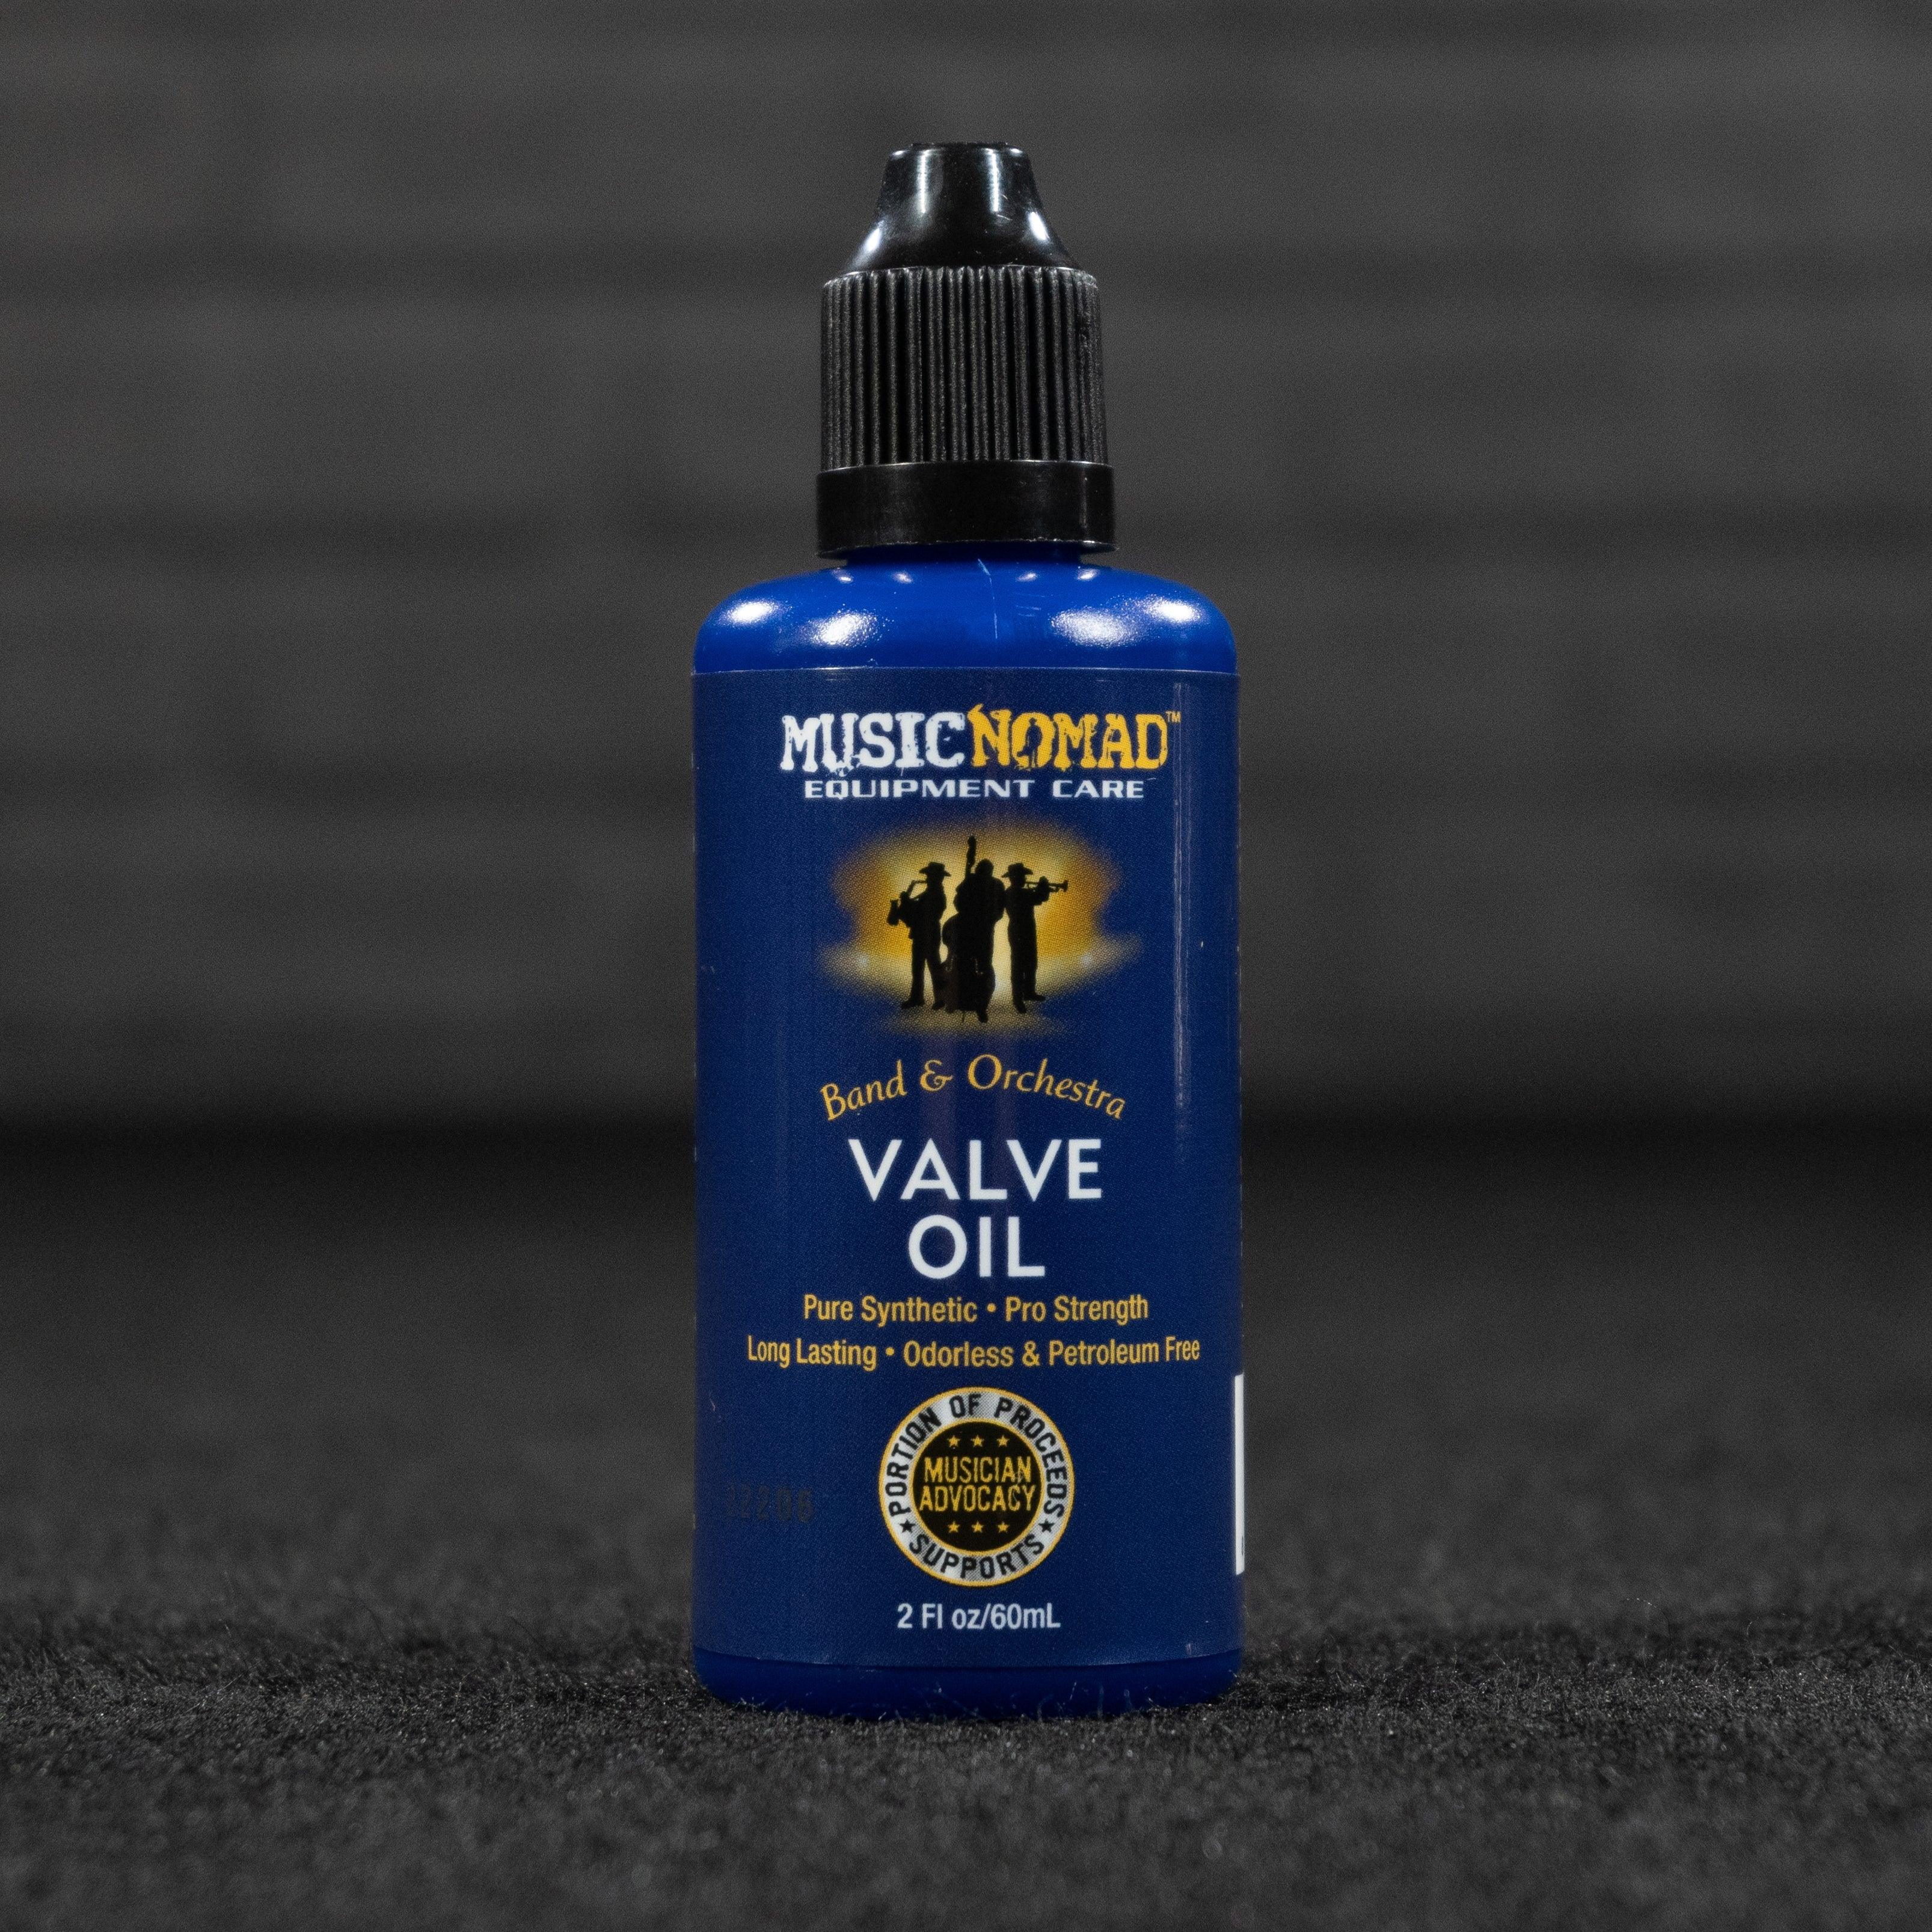 Music Nomad Valve Oil - Pro Strength & Pure Synthetic - Impulse Music Co.